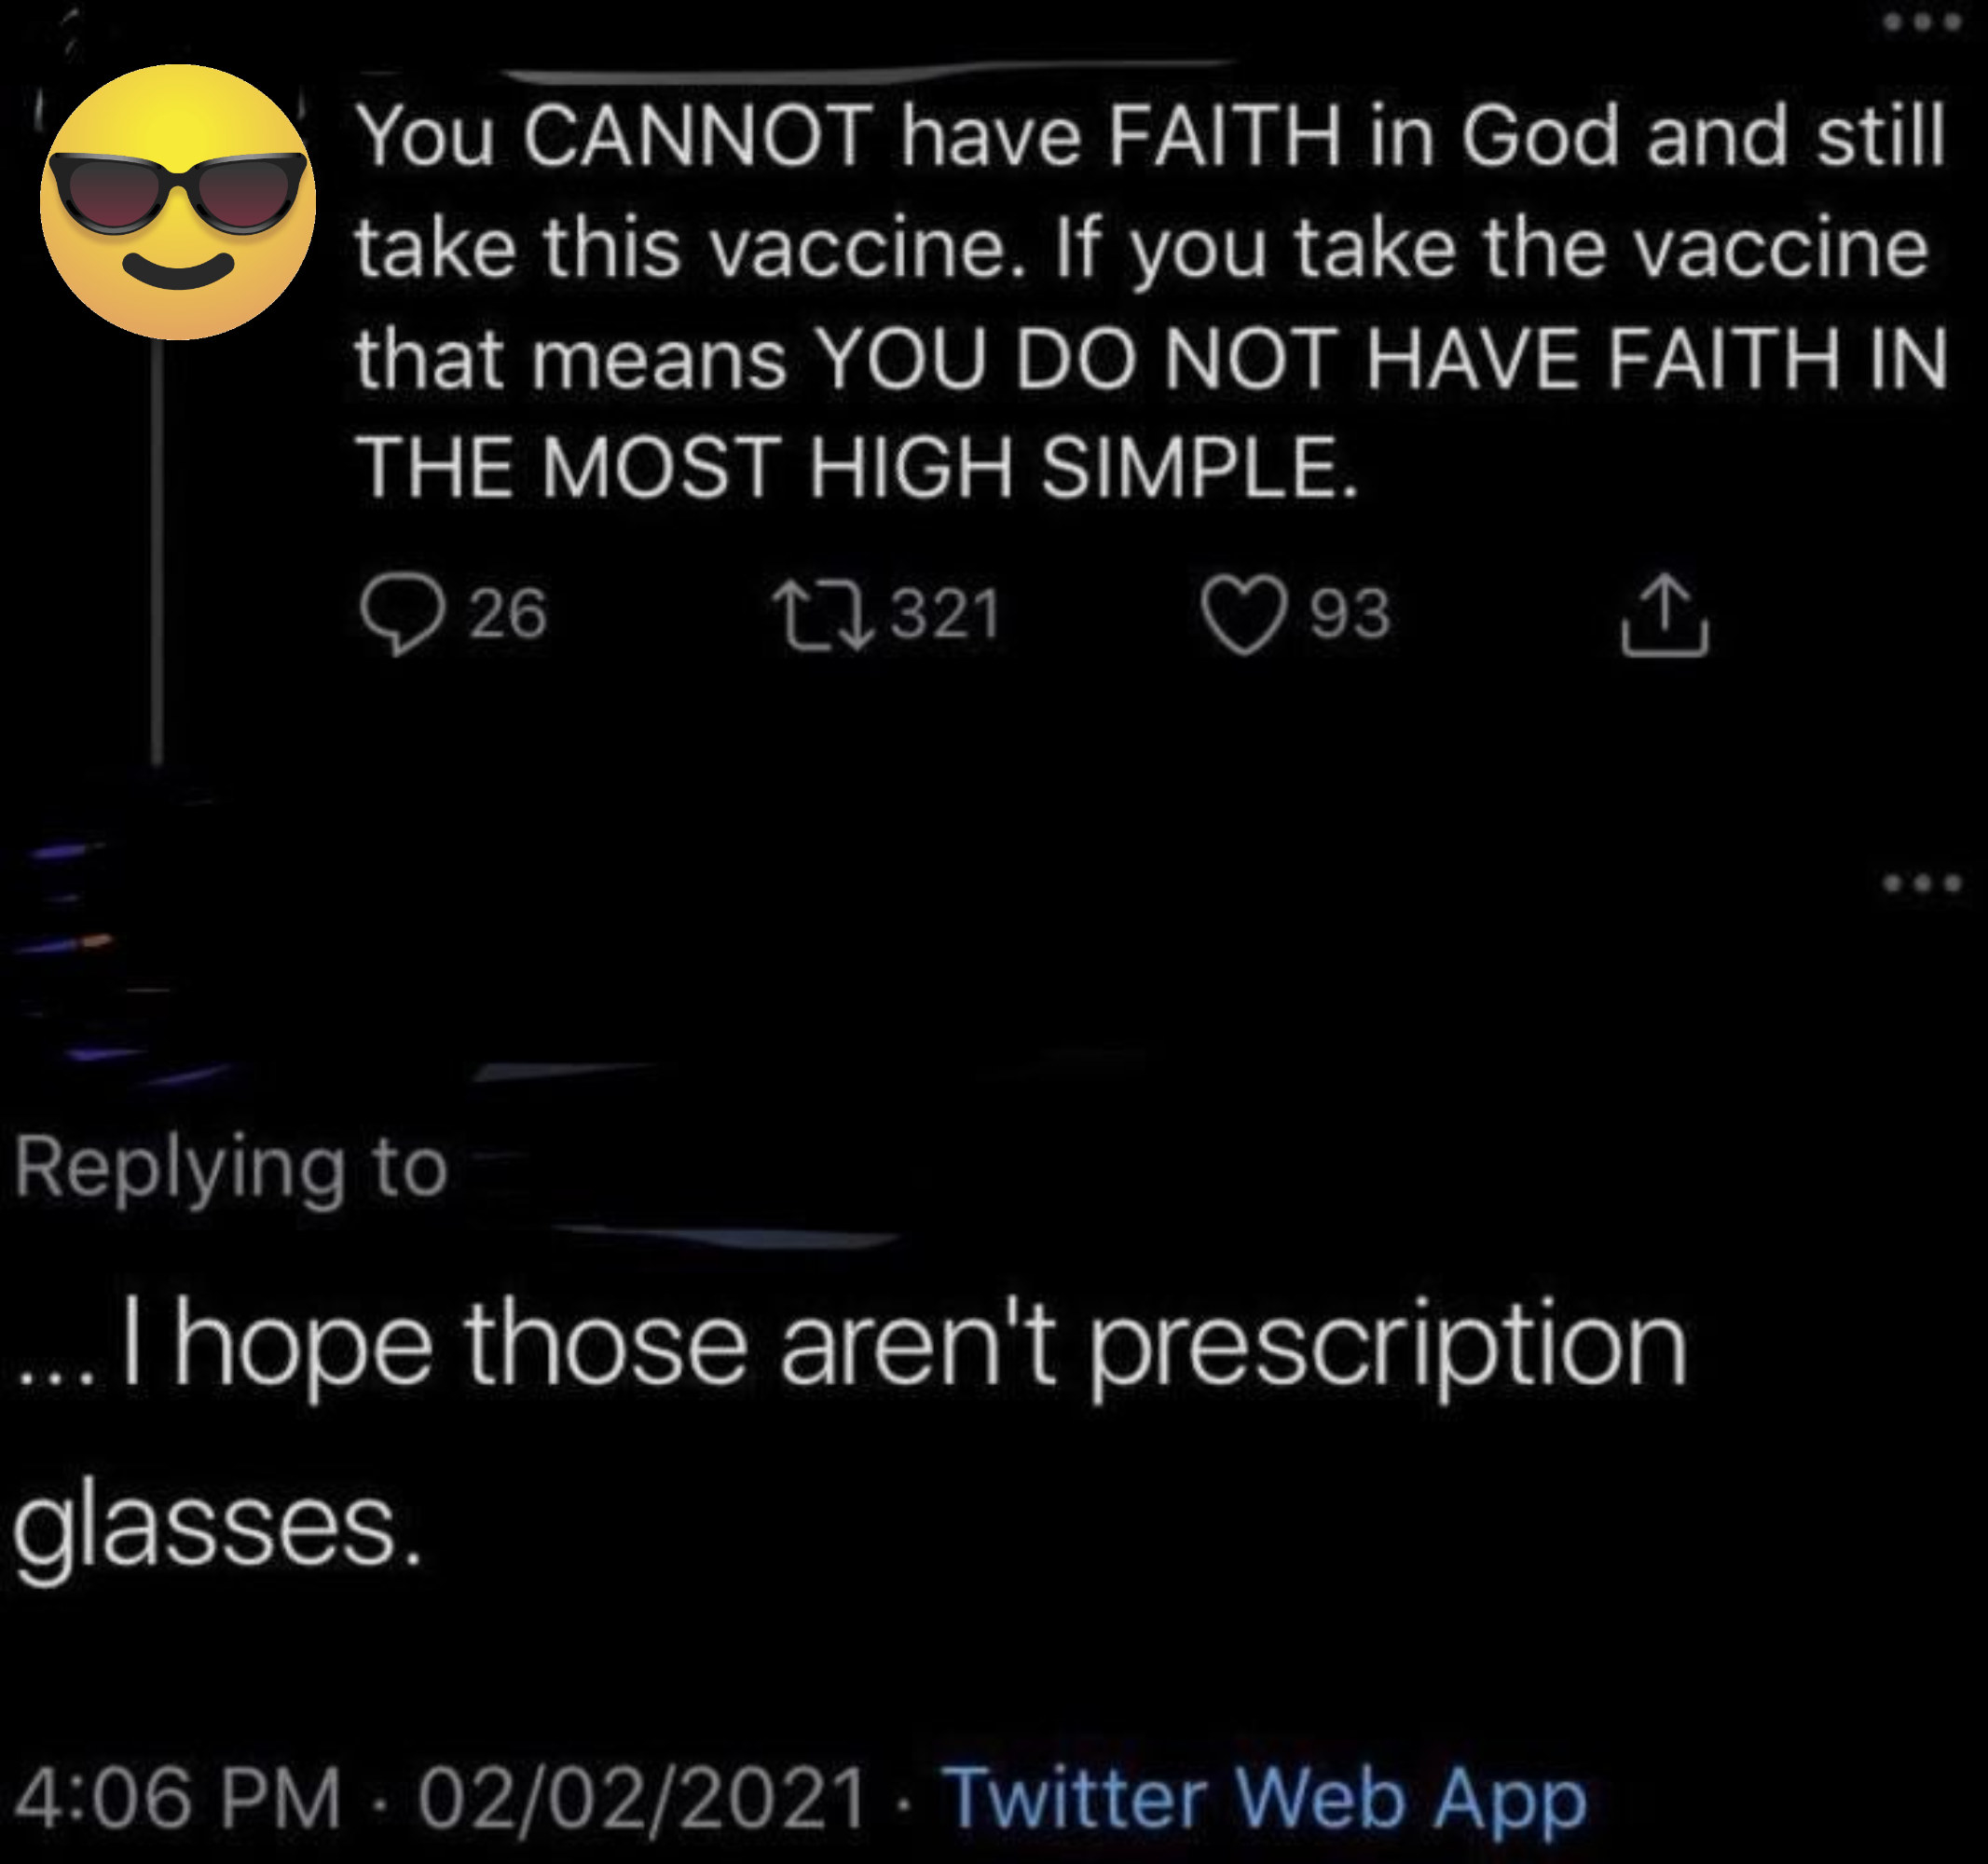 &quot;You cannot have faith in God and still take this vaccine&quot; Response: I hope those aren&#x27;t prescription glasses